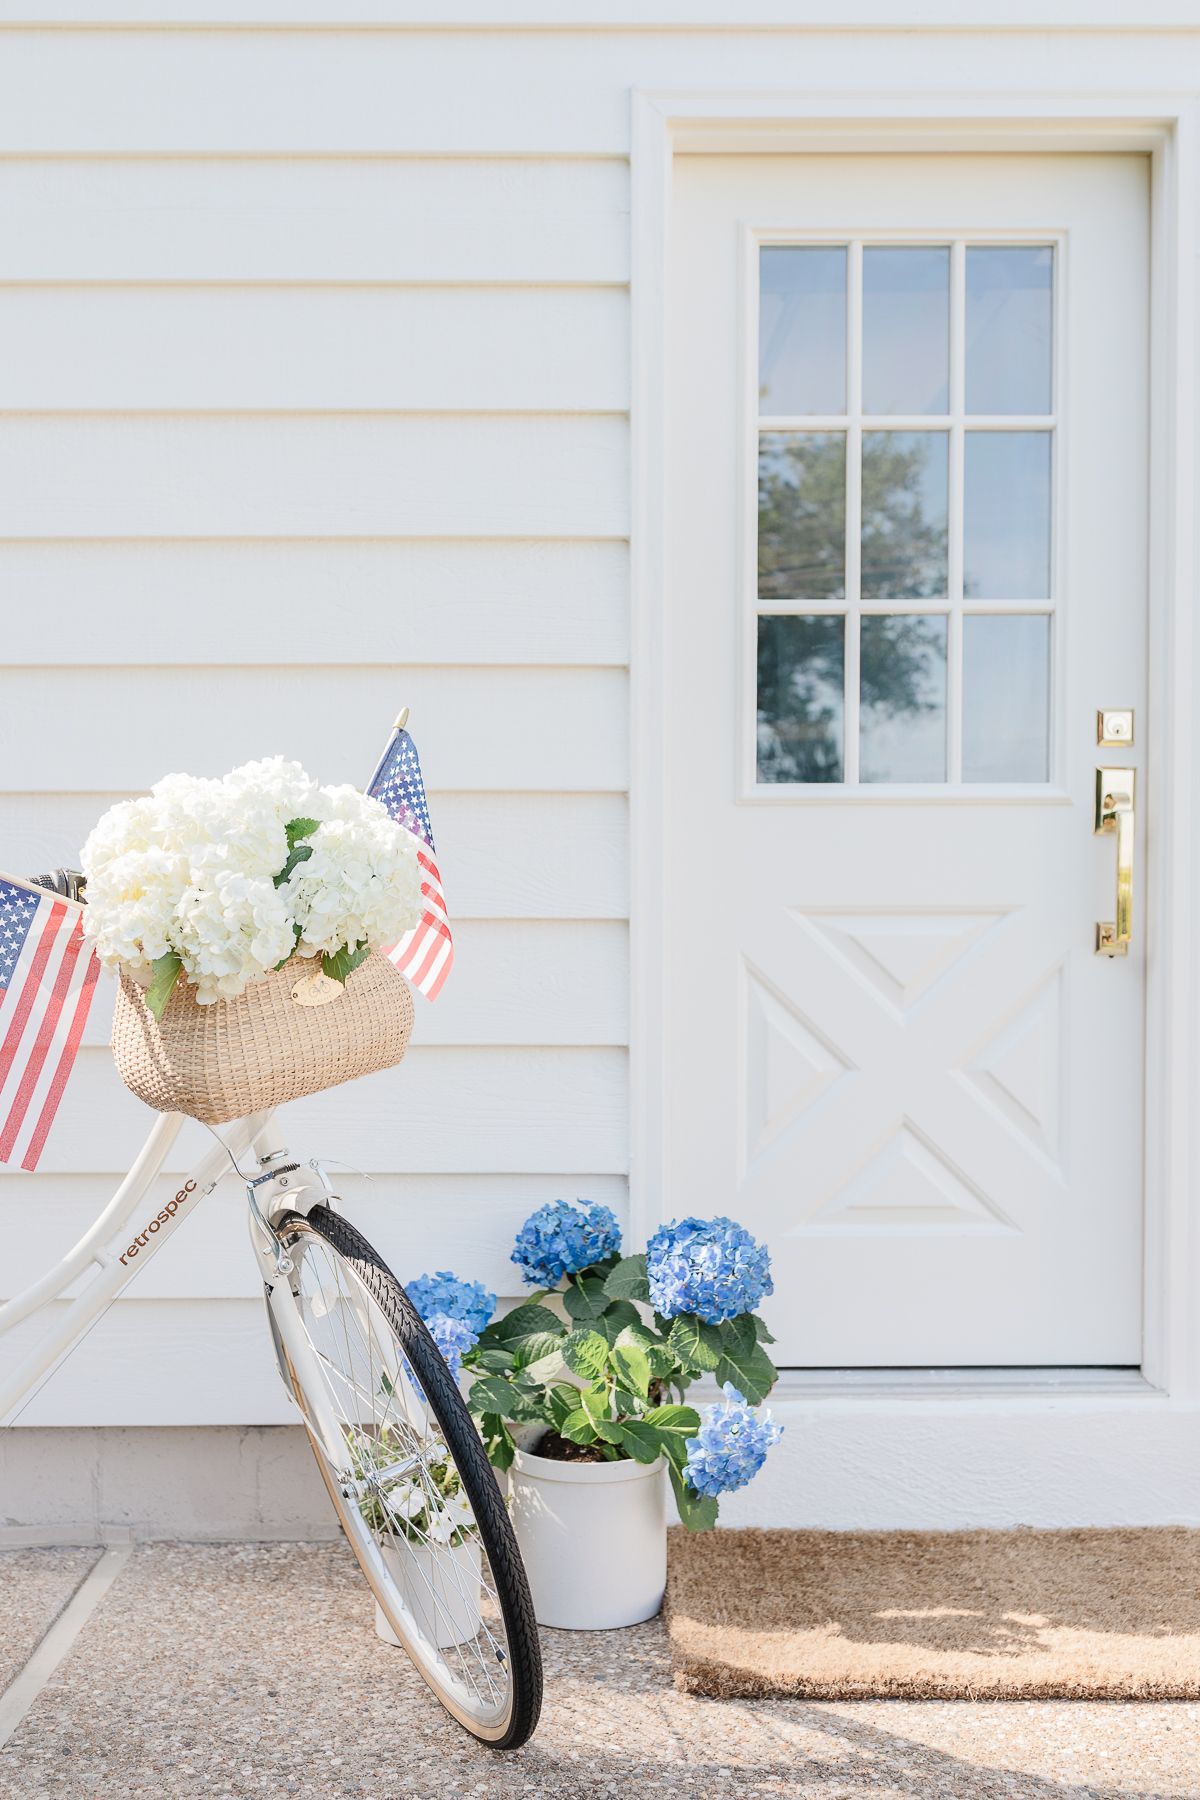 A white biked decorated for the 4th of July, parked in front of a white door with a brass exterior door handle